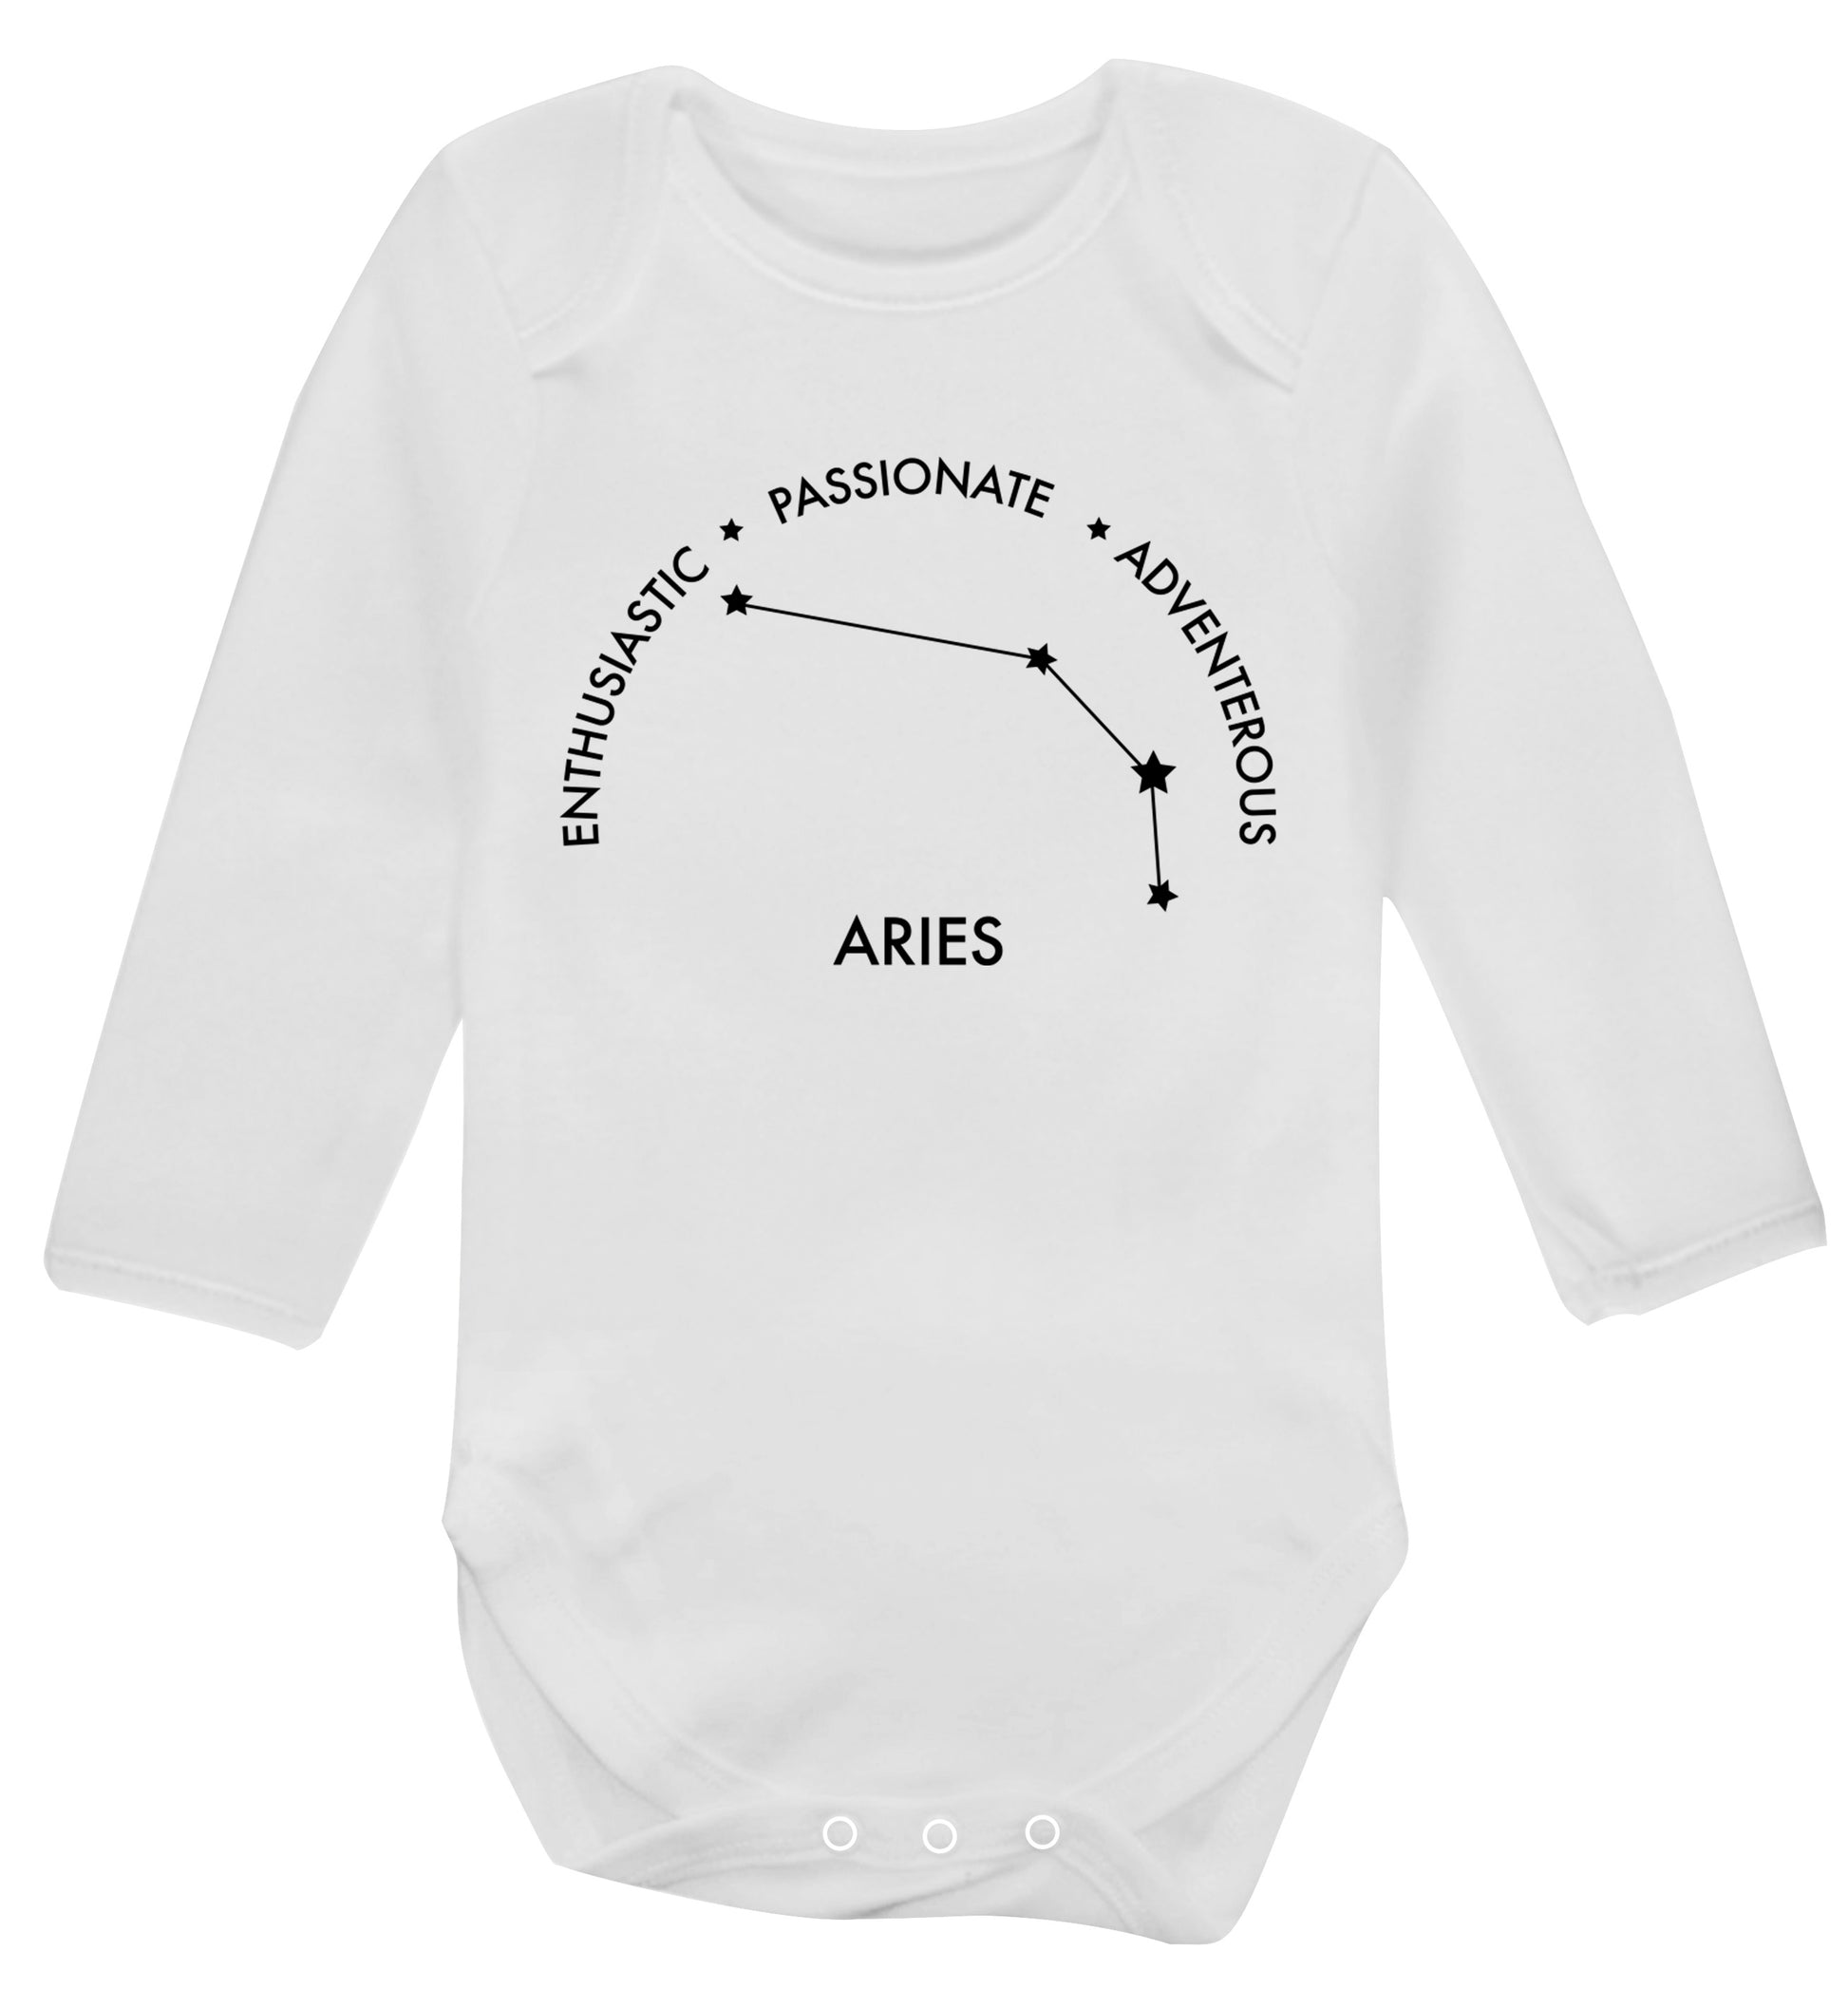 Aries enthusiastic | passionate | adventerous Baby Vest long sleeved white 6-12 months